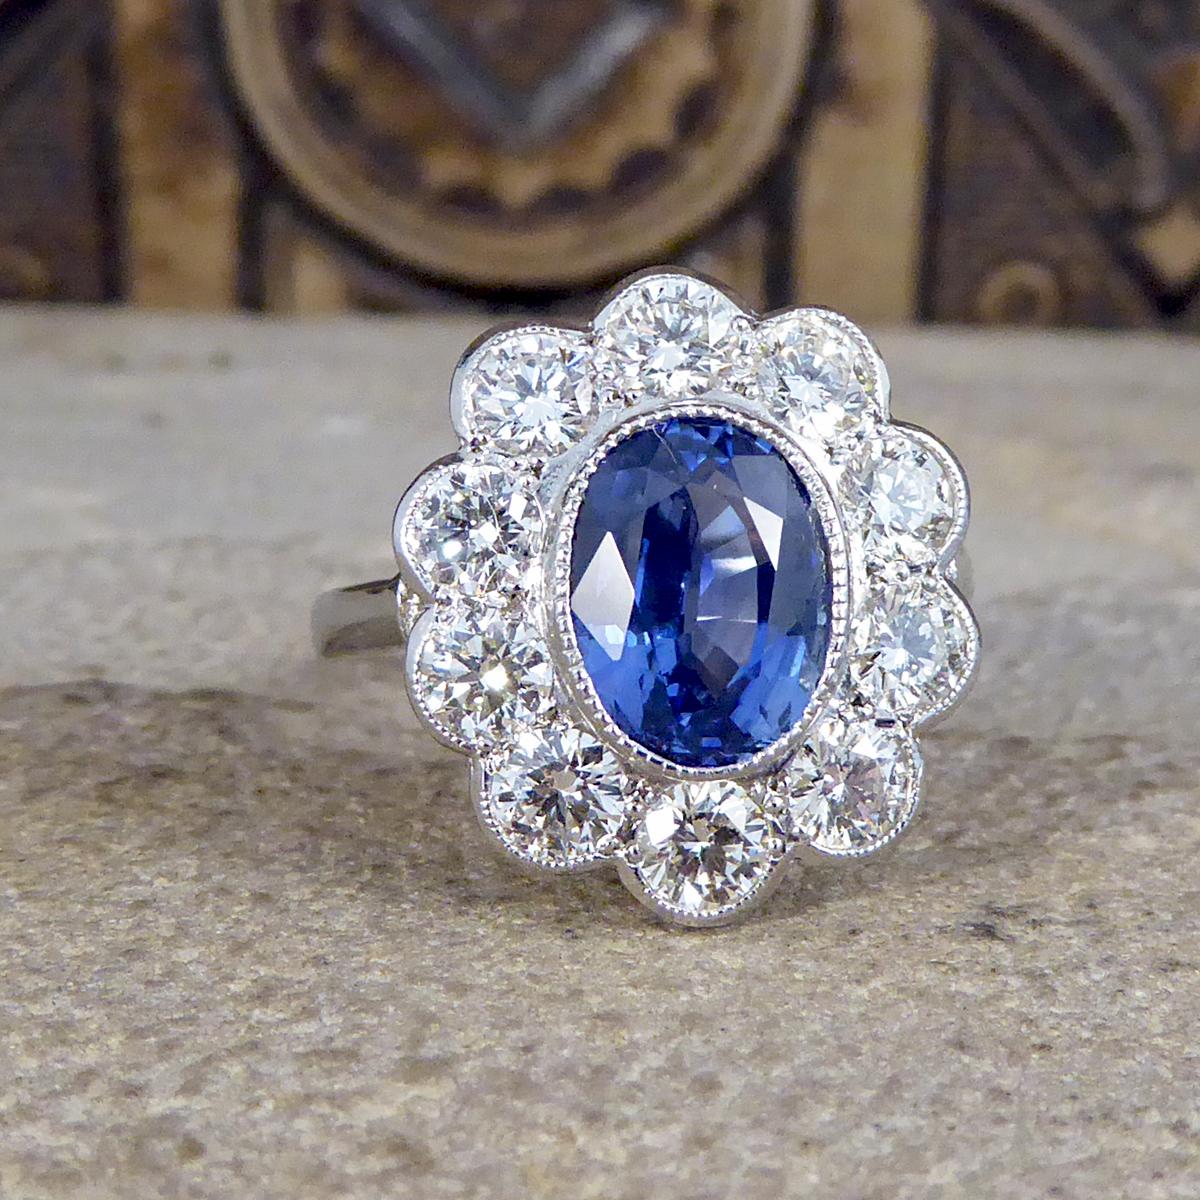 This contemporary ring holds a 2.45ct dazzling blue Sapphire in the centre of the ring and surrounded by 10 Modern Brilliant cut bright and clear Diamonds making a cluster. Complimenting the Sapphire gemstone is a Platinum rub over collar setting,